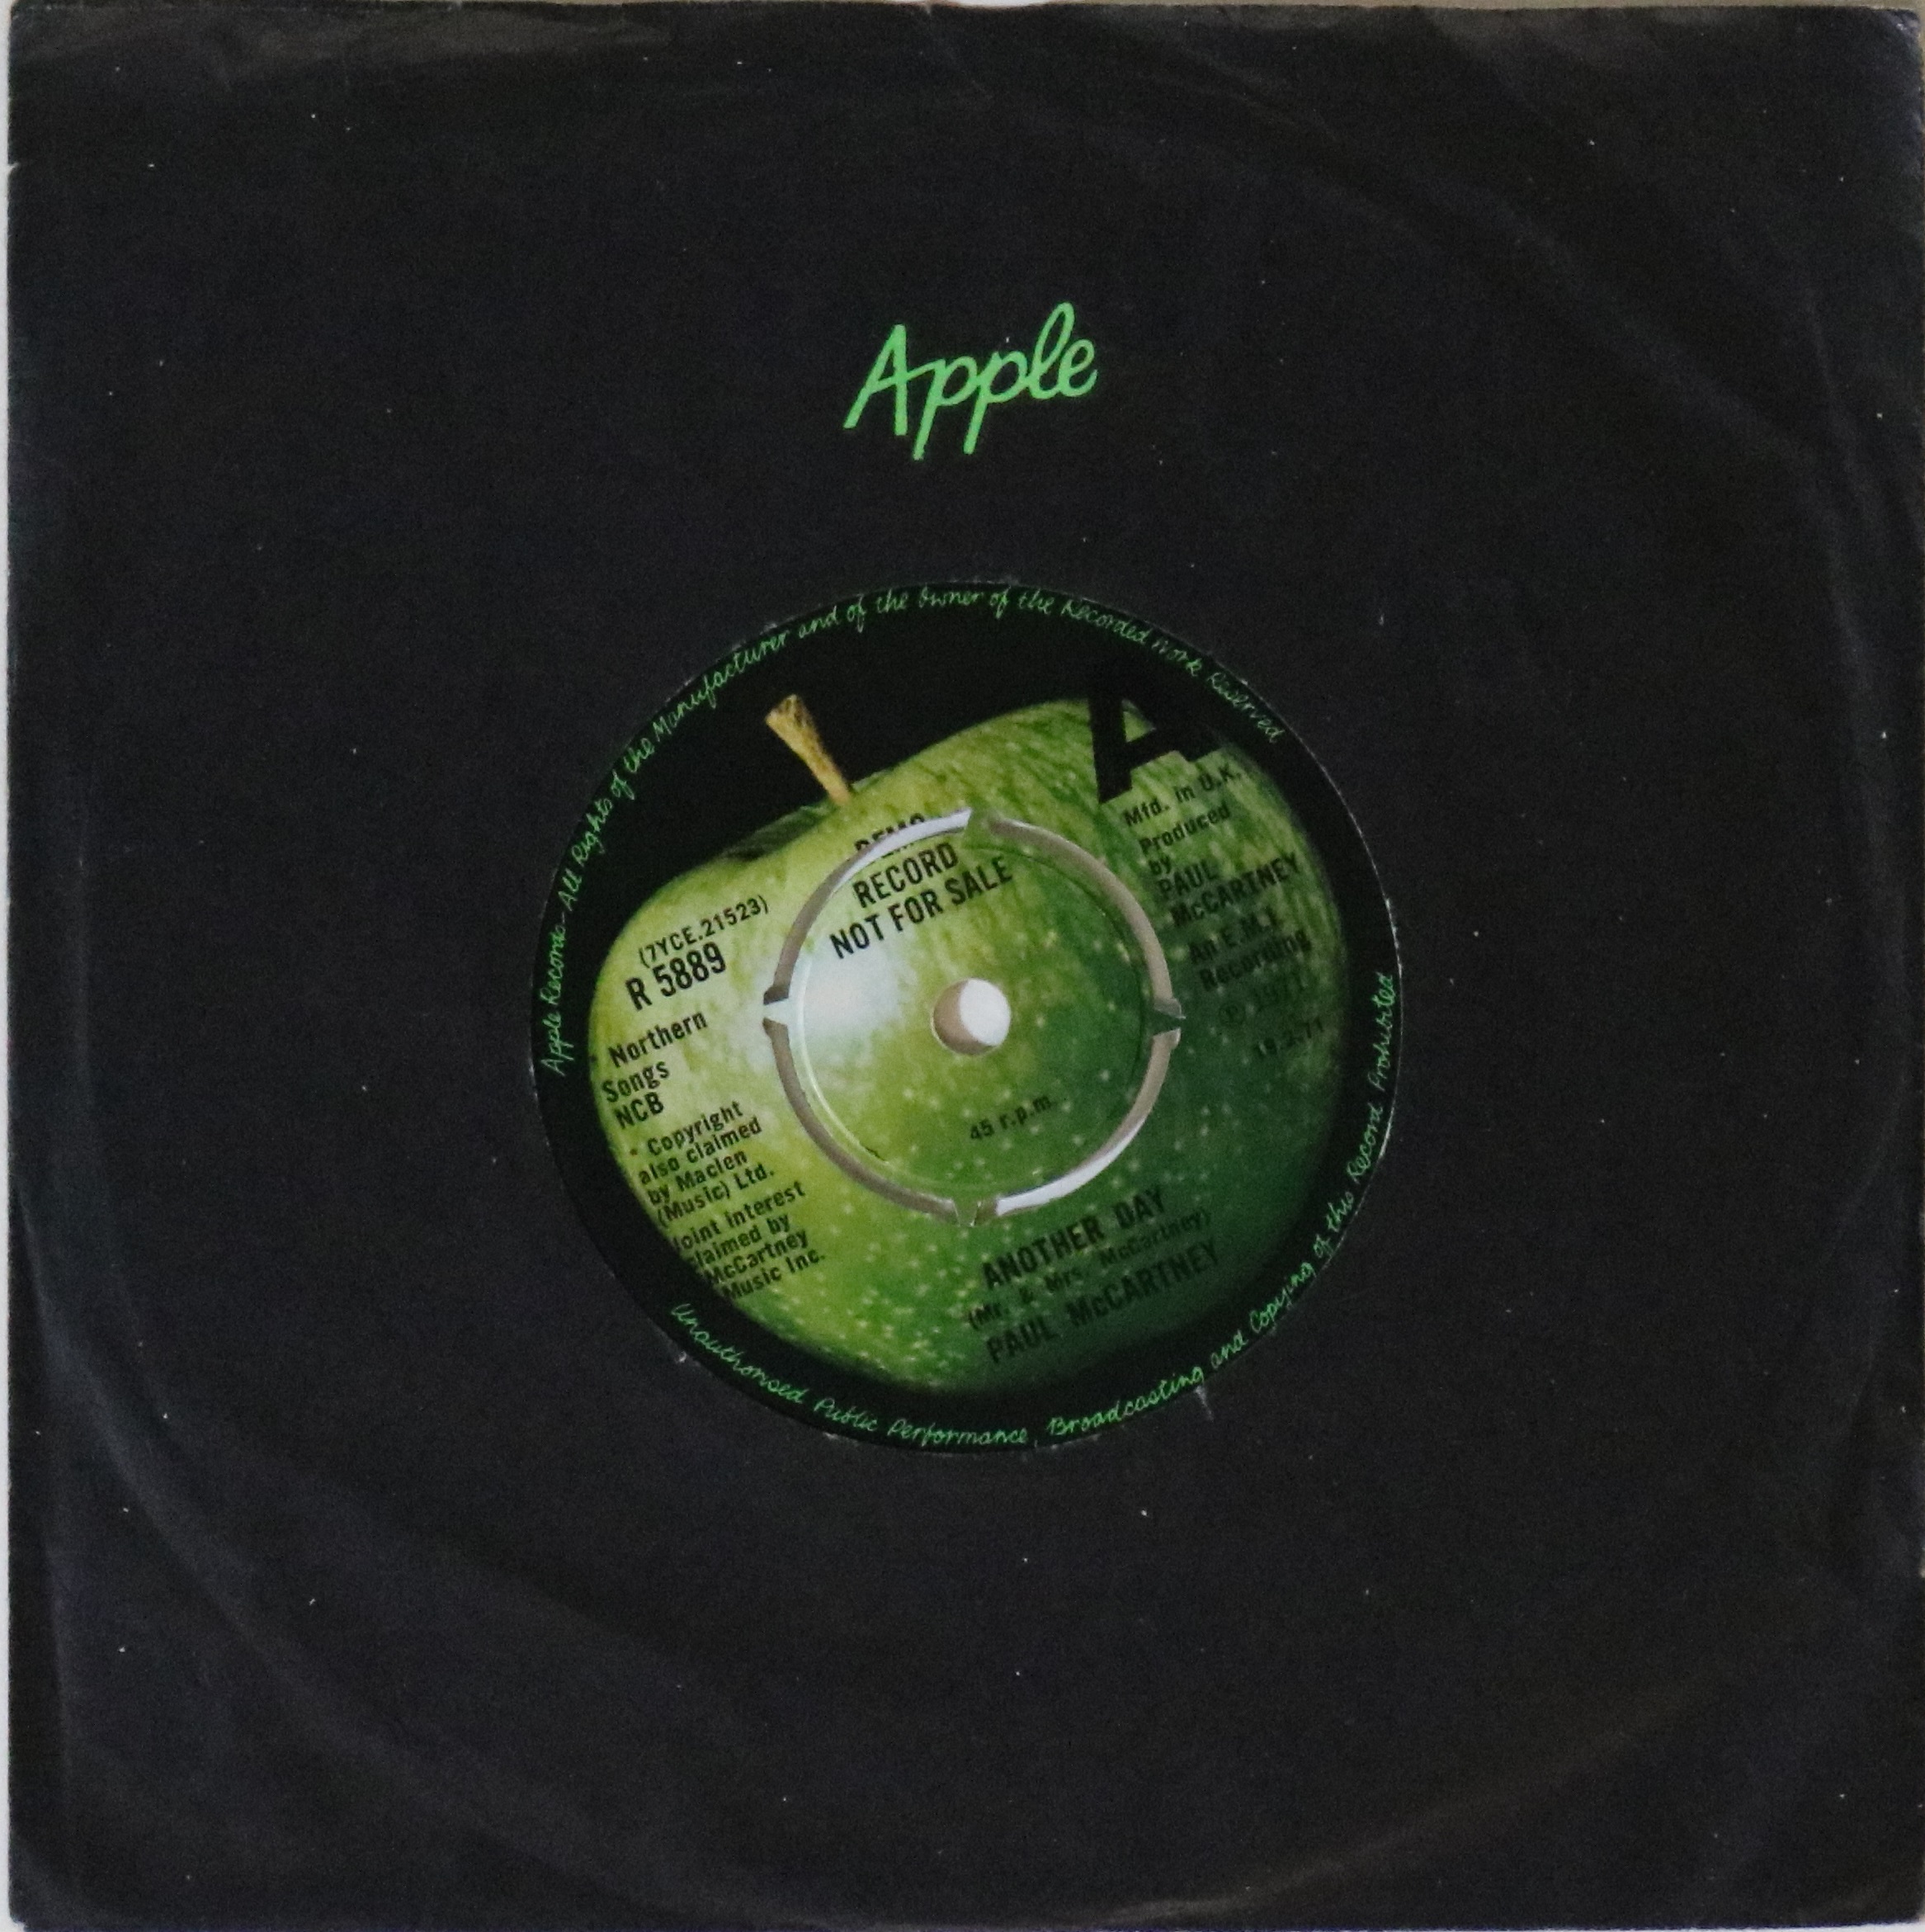 PAUL McCARTNEY - ANOTHER DAY (PROMO - APPLE R 5889).